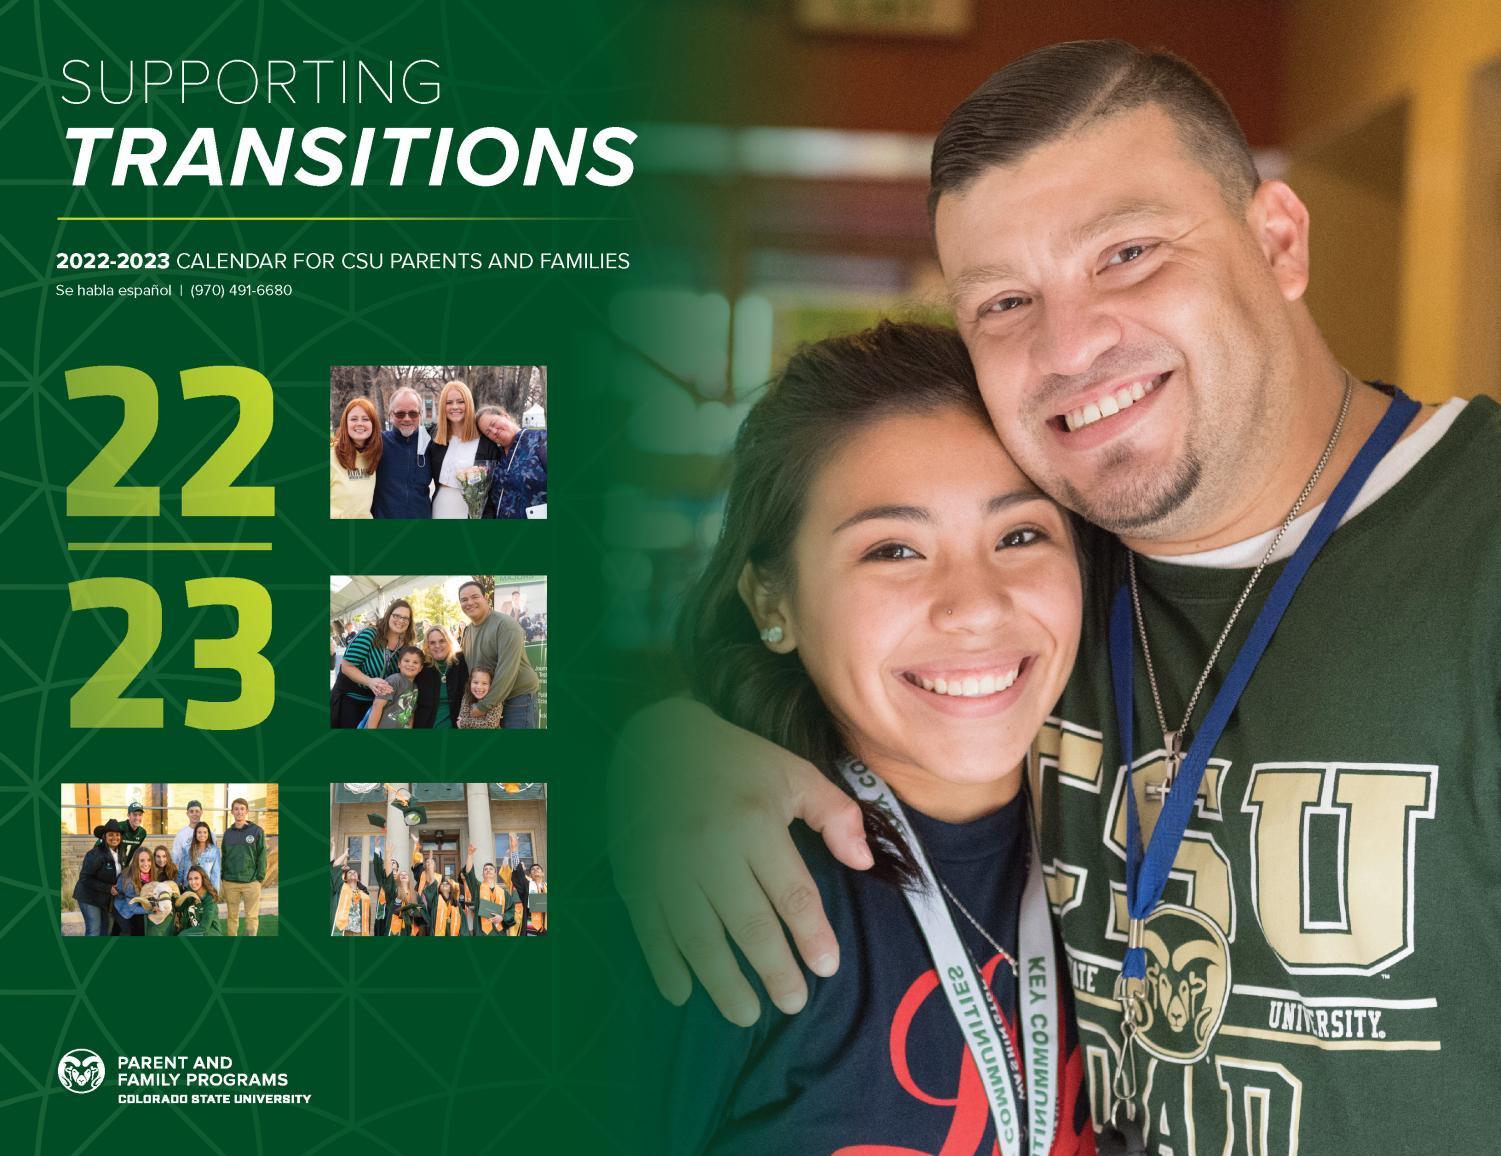 CSU Parent Family Resource Guide The Rocky Mountain Collegian